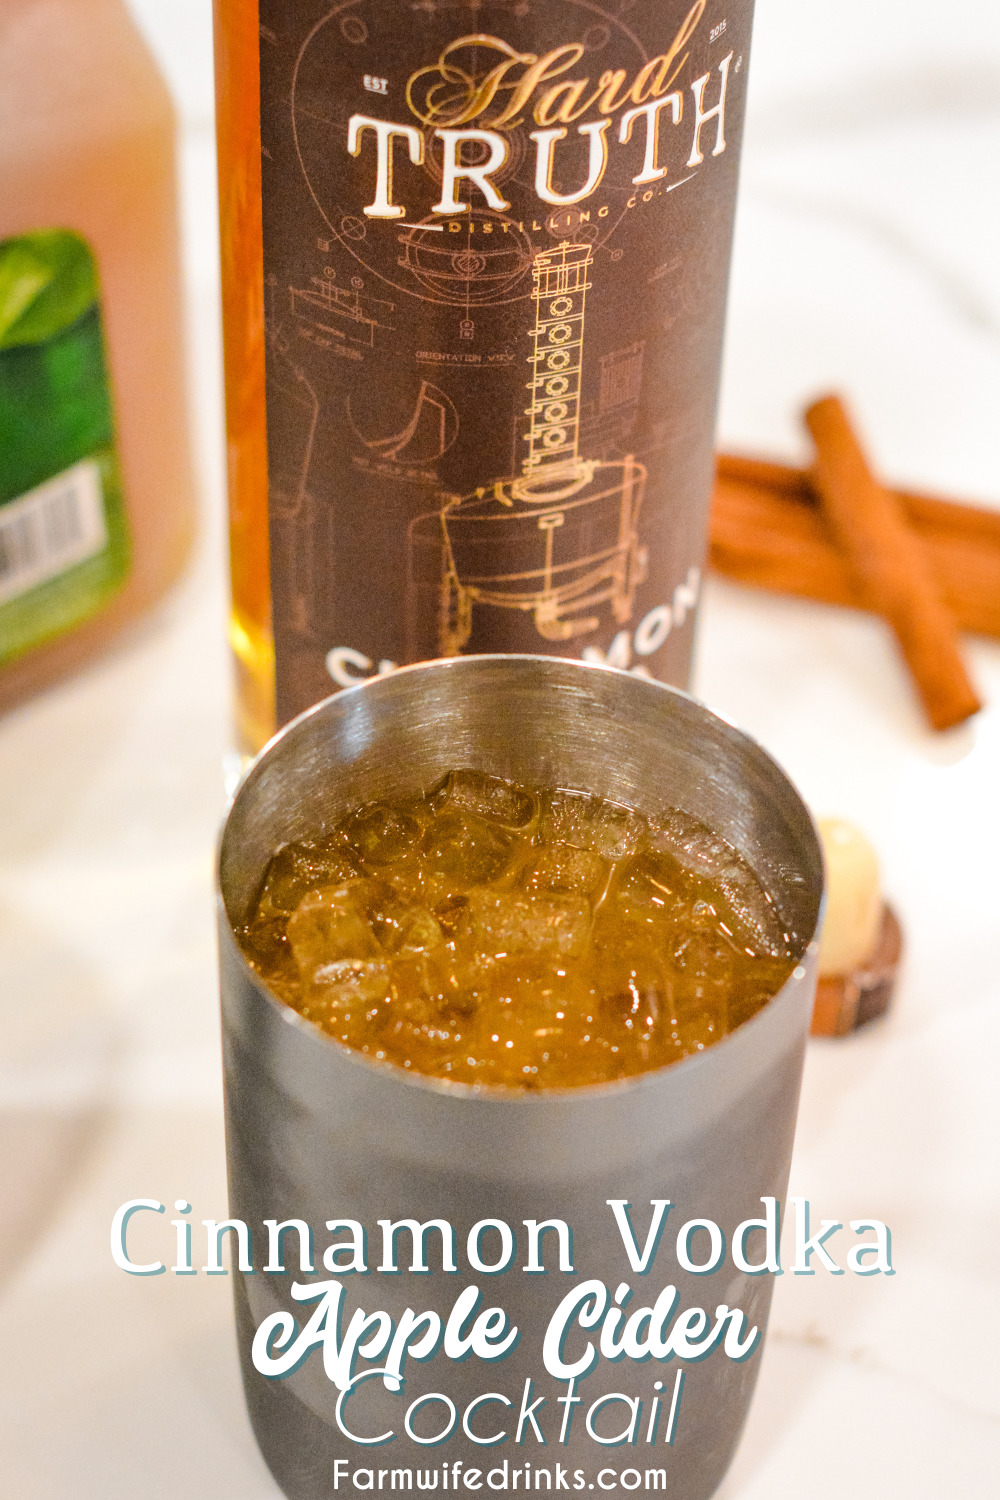 Cinnamon vodka apple cider cocktail is a simple fall cocktail for the vodka lovers out there.